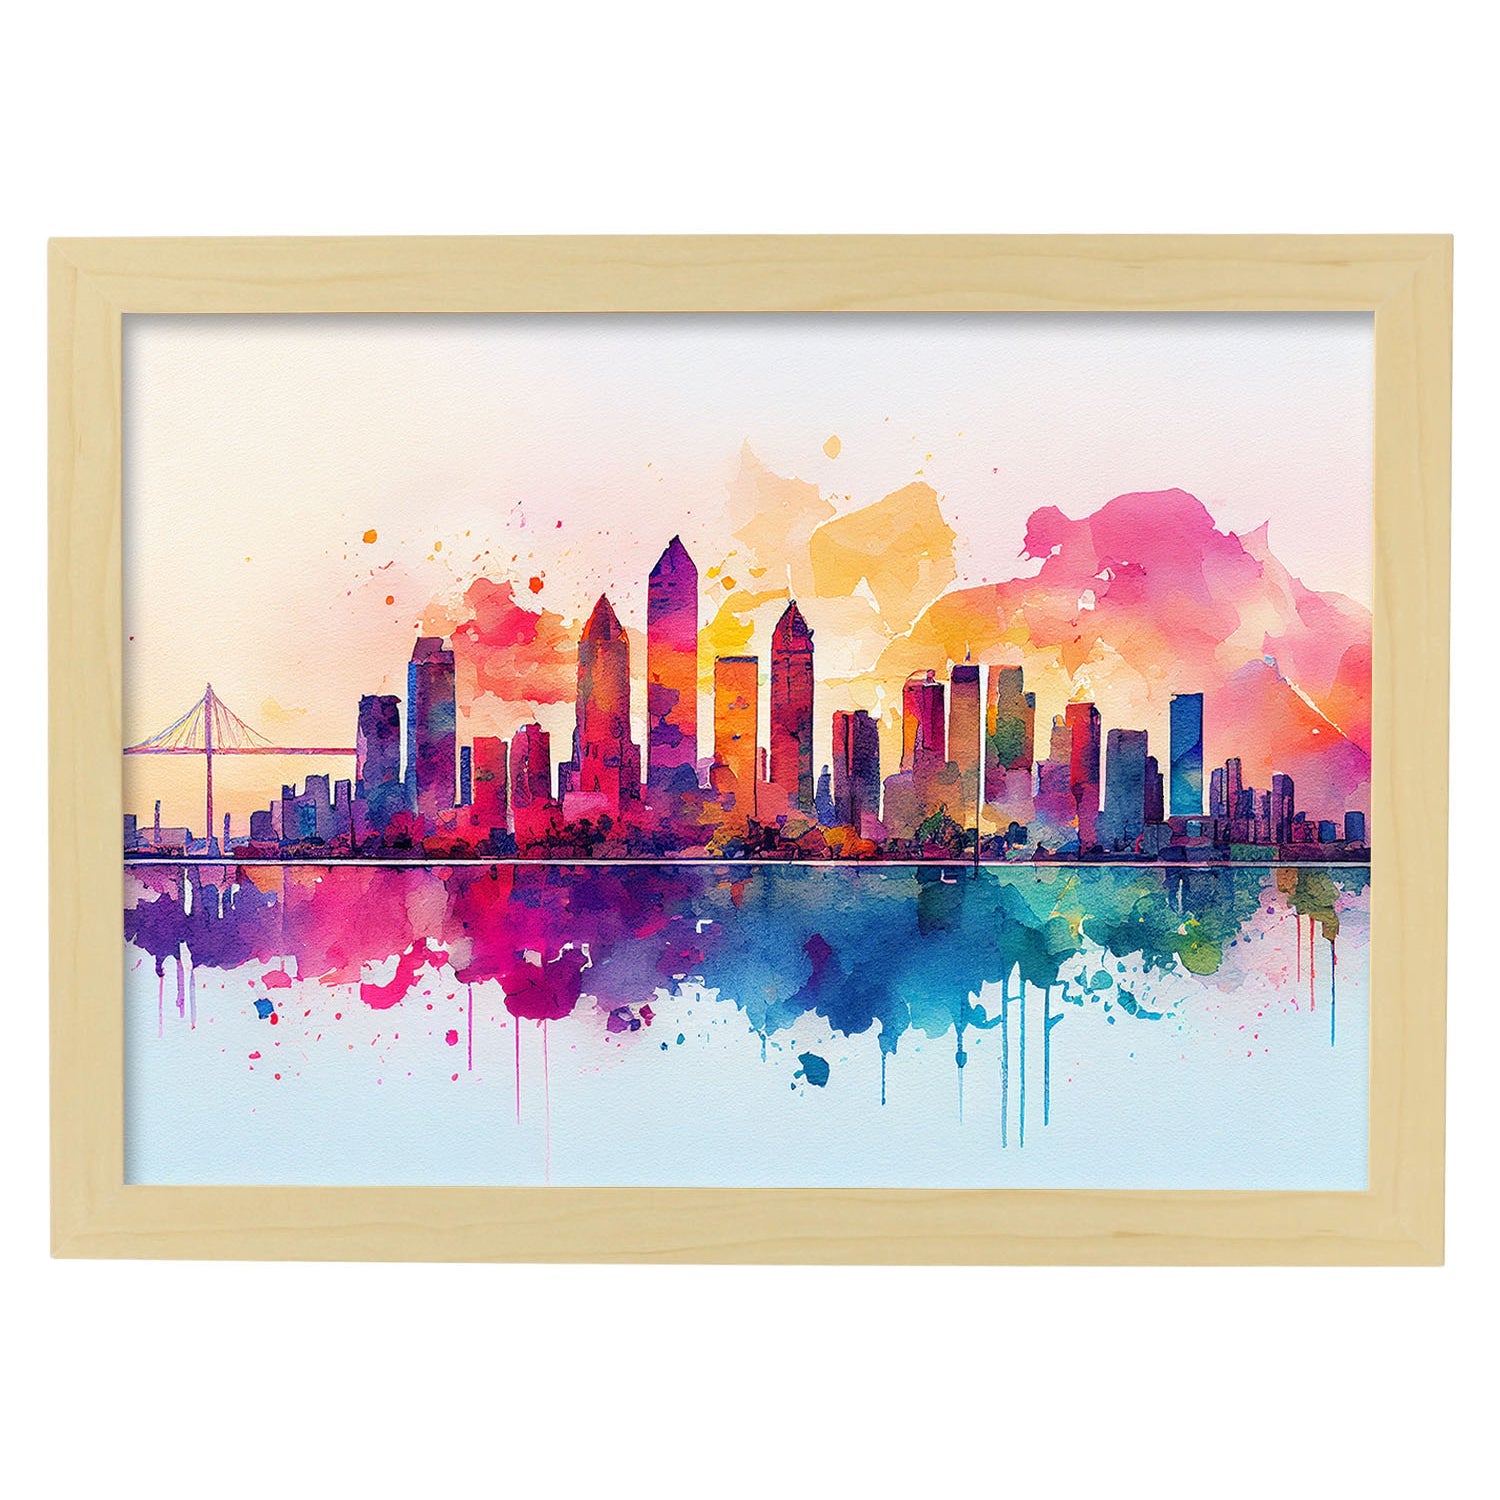 Nacnic watercolor of a skyline of the city of San Diego. Aesthetic Wall Art Prints for Bedroom or Living Room Design.-Artwork-Nacnic-A4-Marco Madera Clara-Nacnic Estudio SL